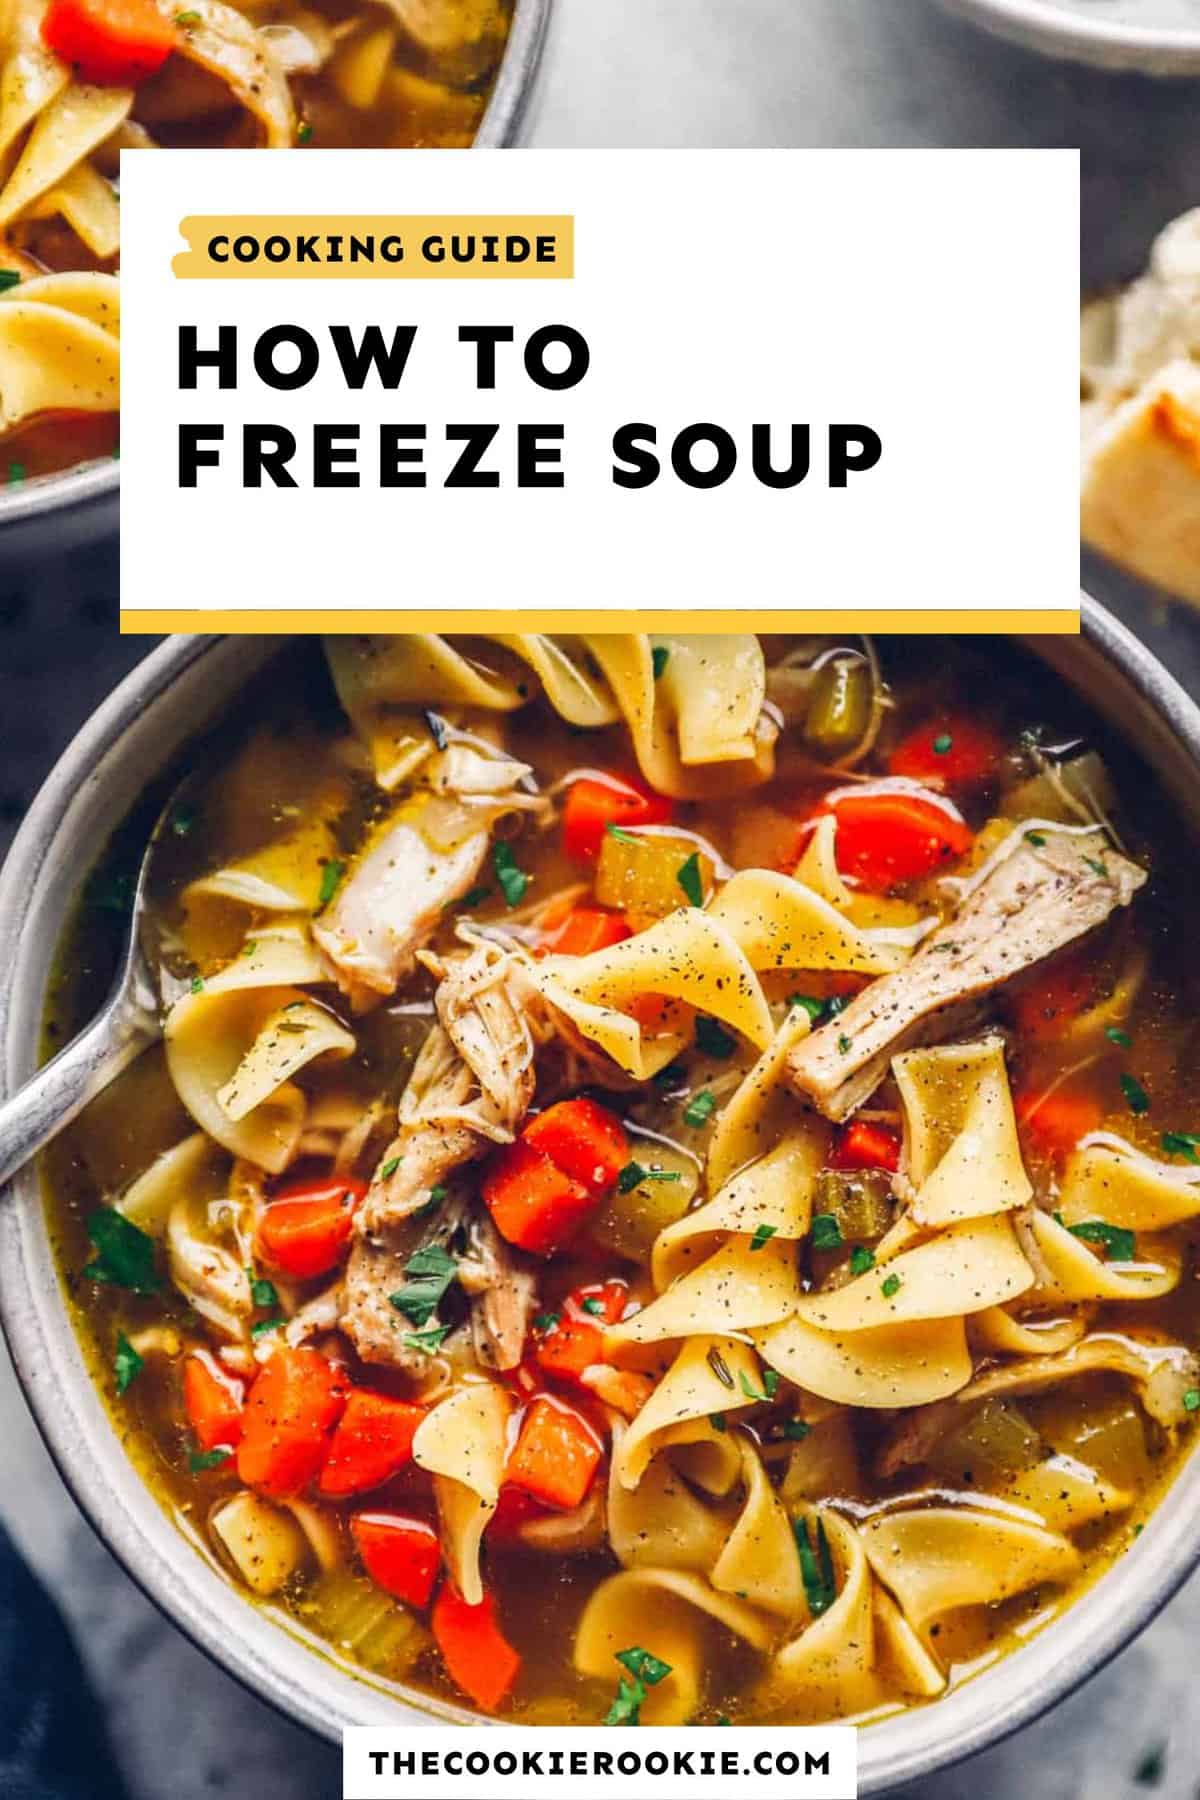 A Quick Guide to Freezing and Reheating Soup …